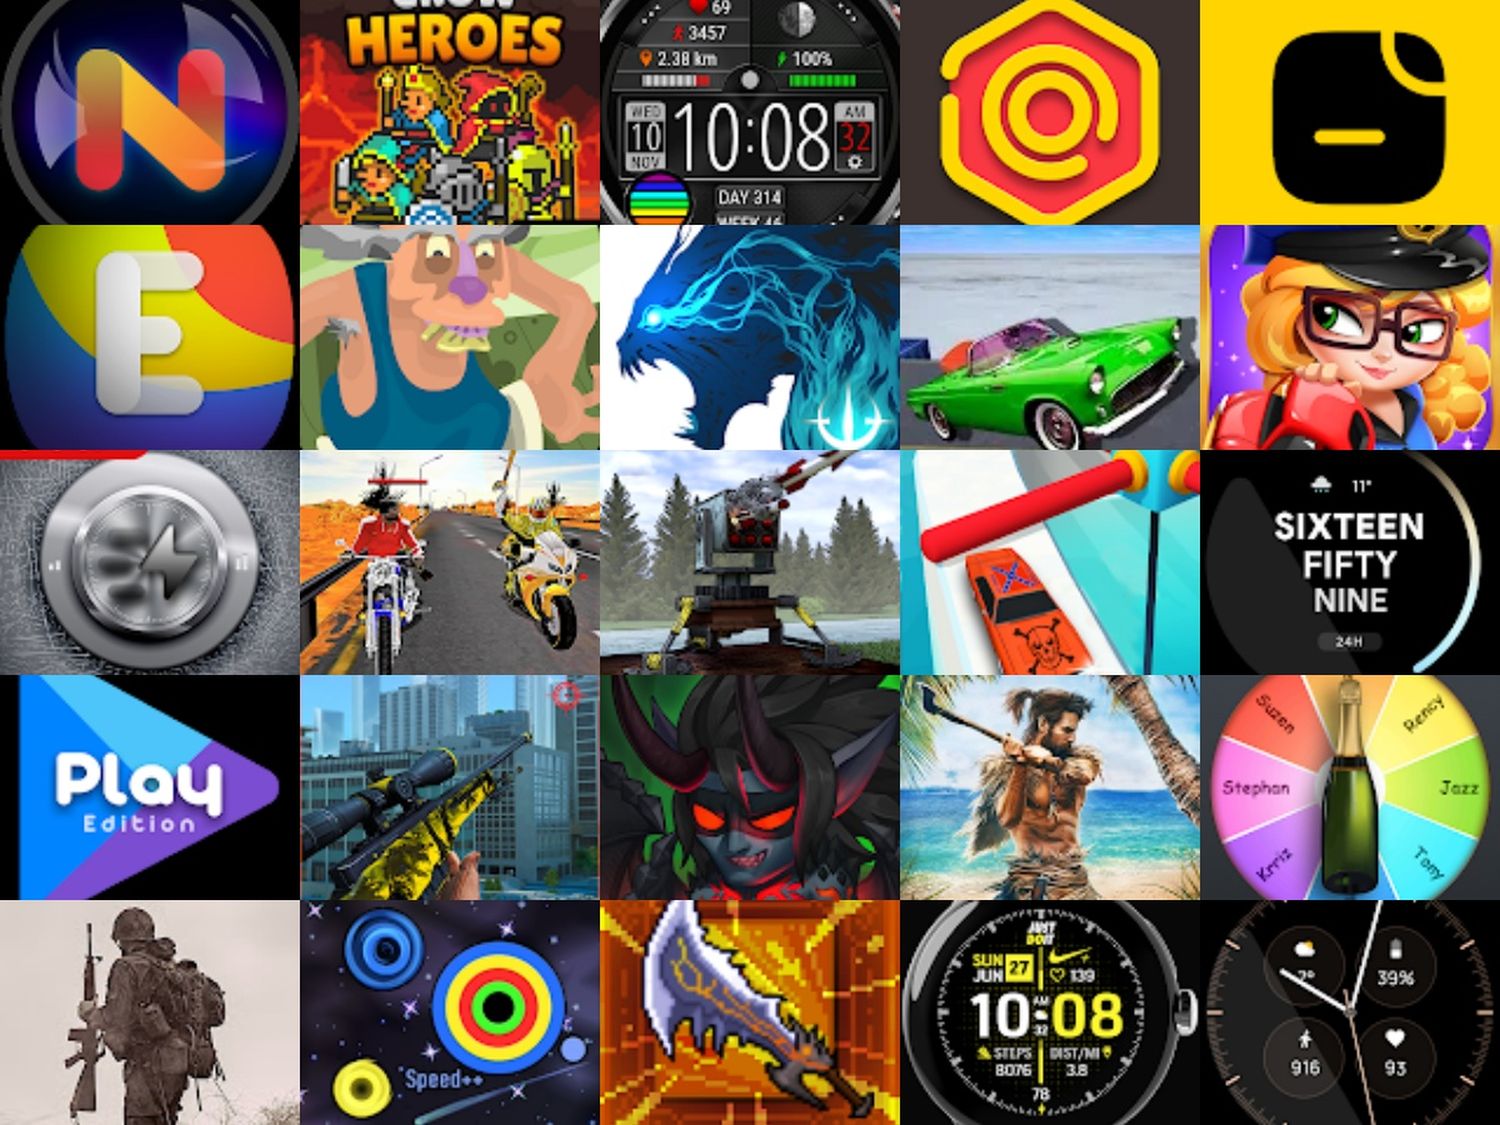 Google-Play-Store-Aktion-Diese-67-Android-Apps-Spiele-Icon-Packs-Live-Wallpaper-gibt-es-heute-Gratis